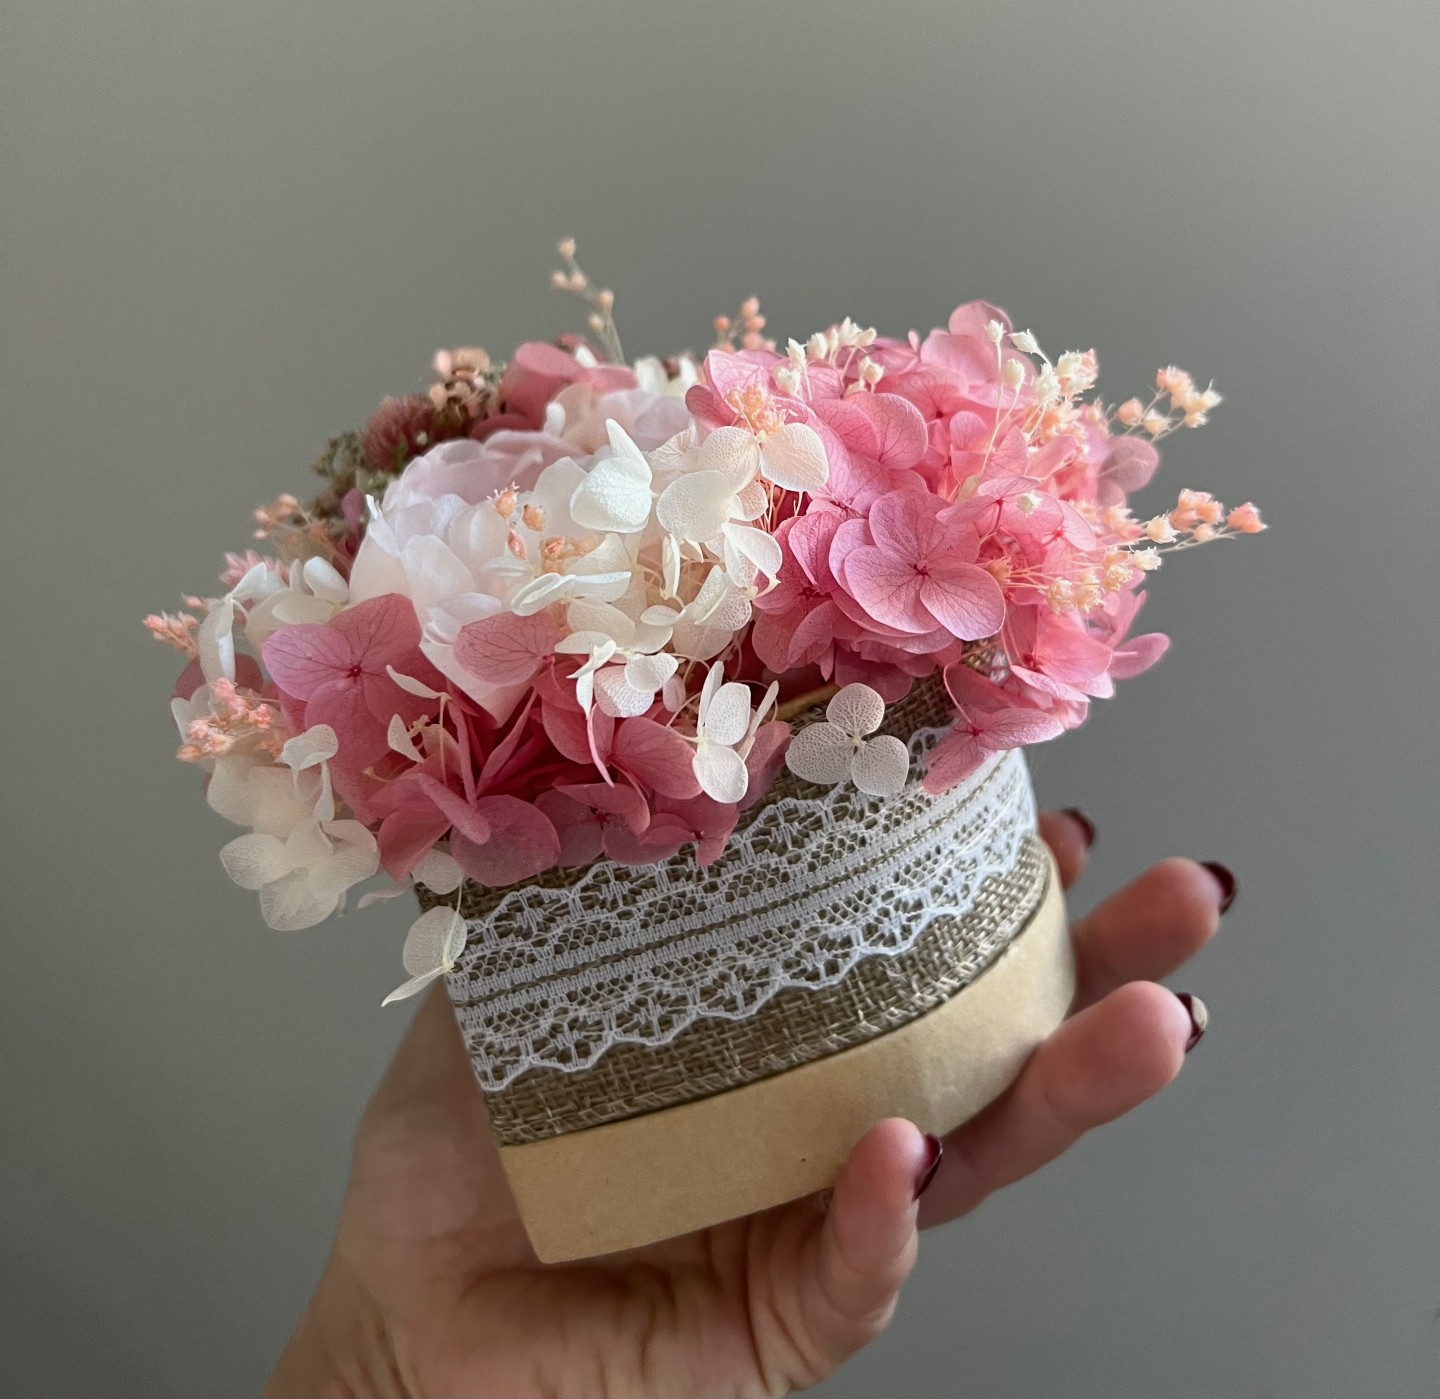 Small heart-shaped box with Preserved Peony